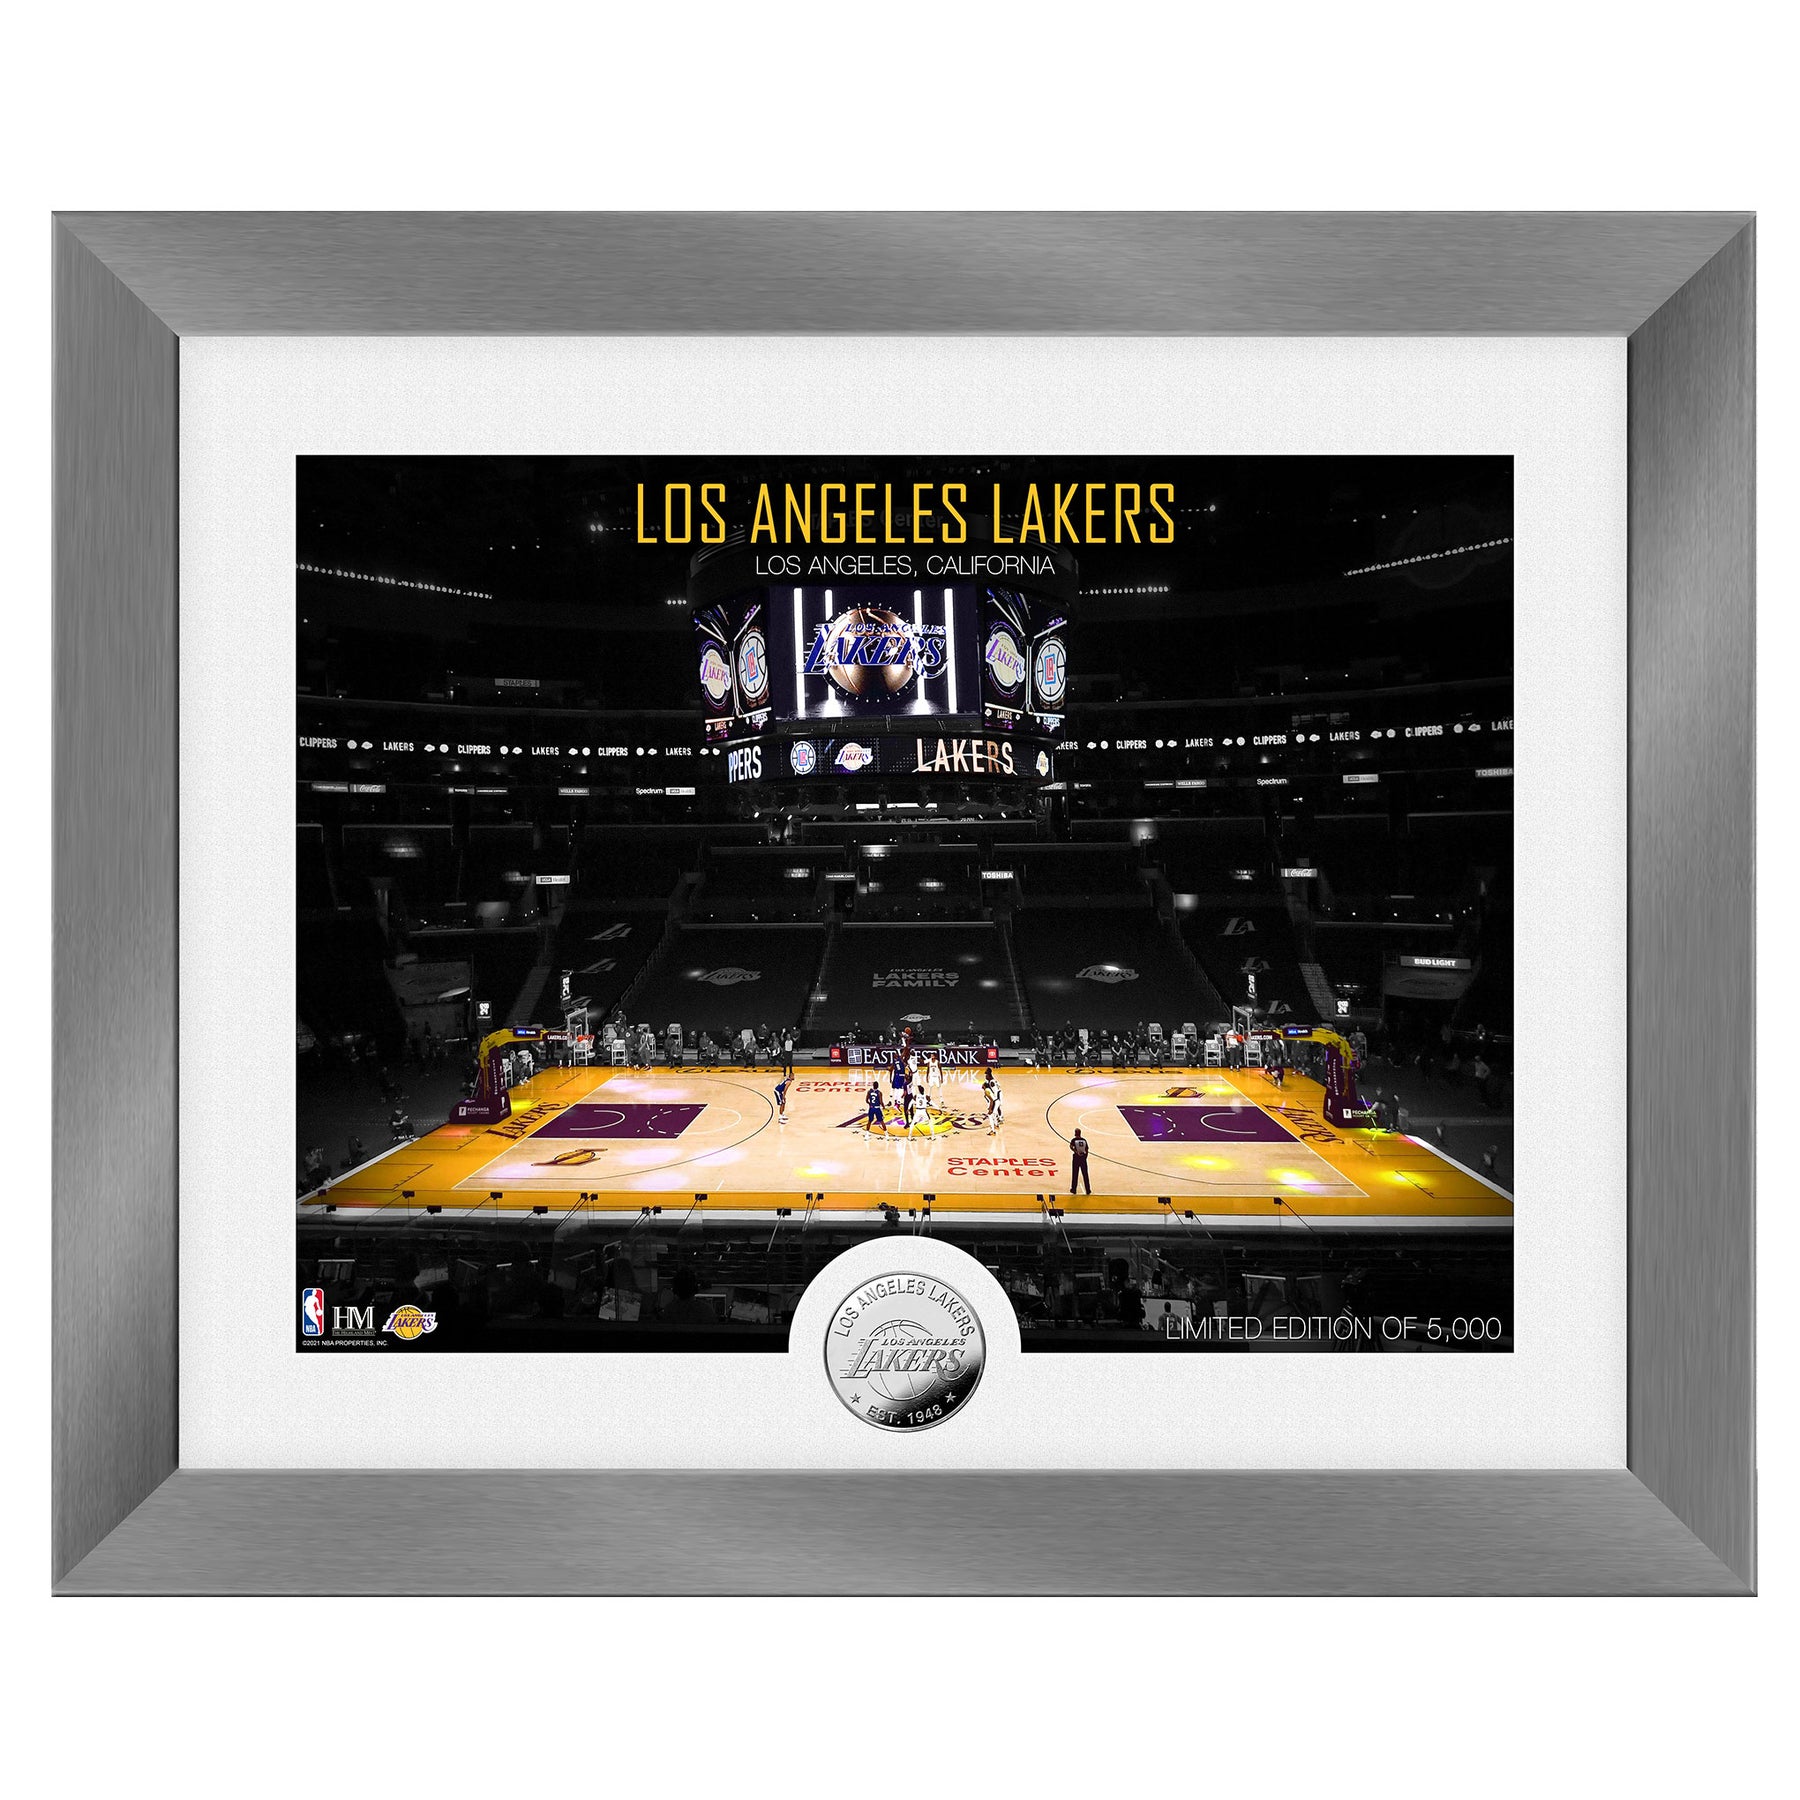 Los Angeles Lakers Art Deco Stadium Silver Coin in Framed Photo